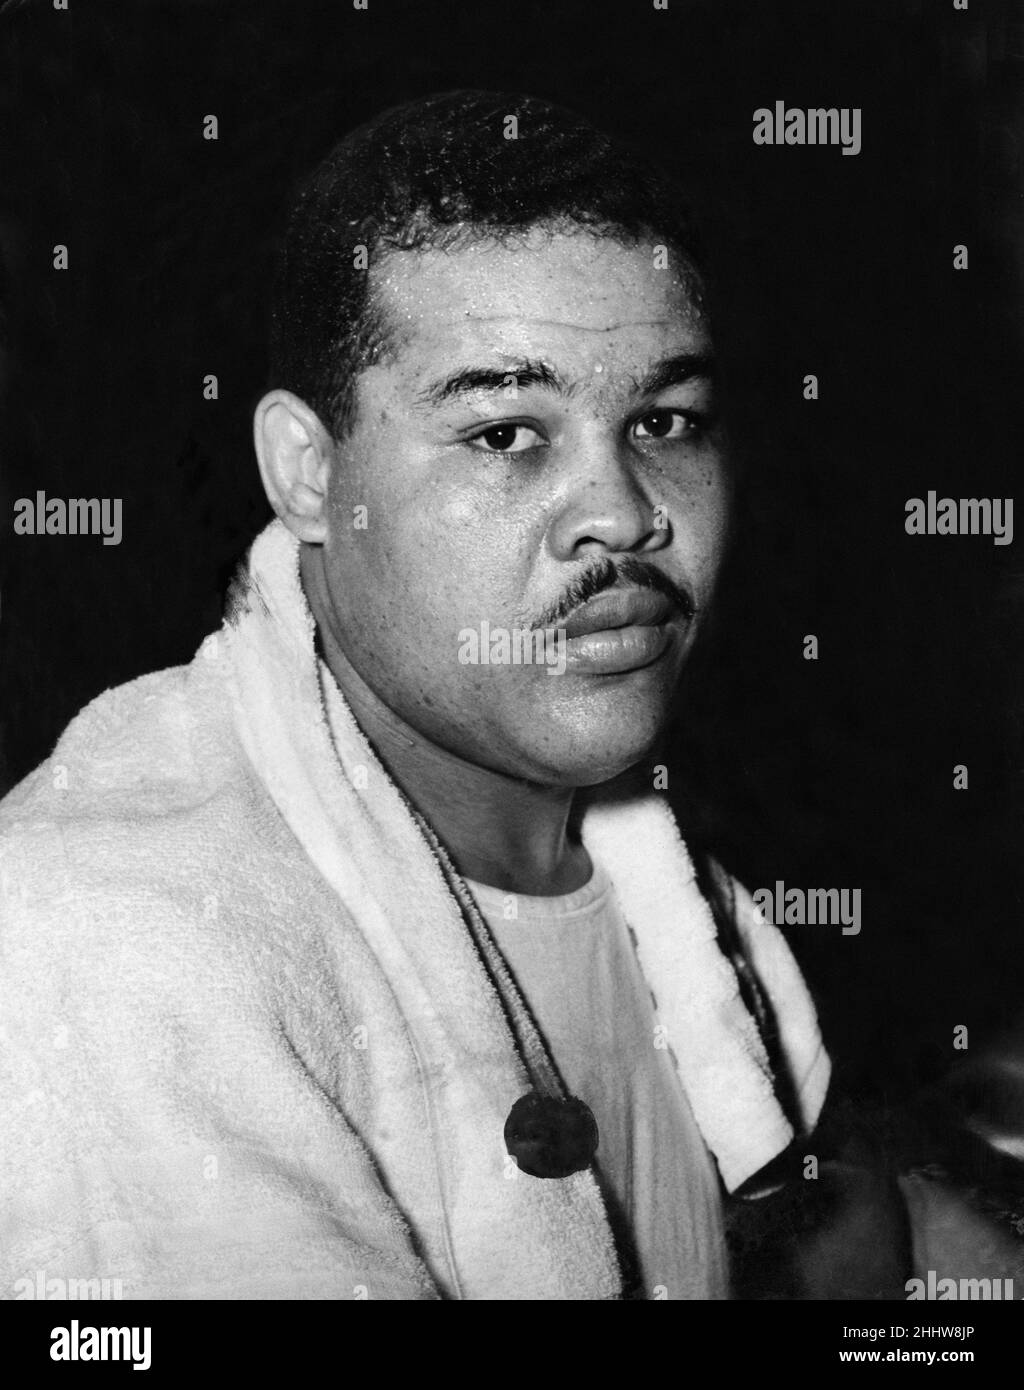 American  boxer Joe Louis, former heavweight champion of the world, takes a rest between bouts during the Arena of Sport exhibition held at Earls Court, London. 27th February 1948. Stock Photo